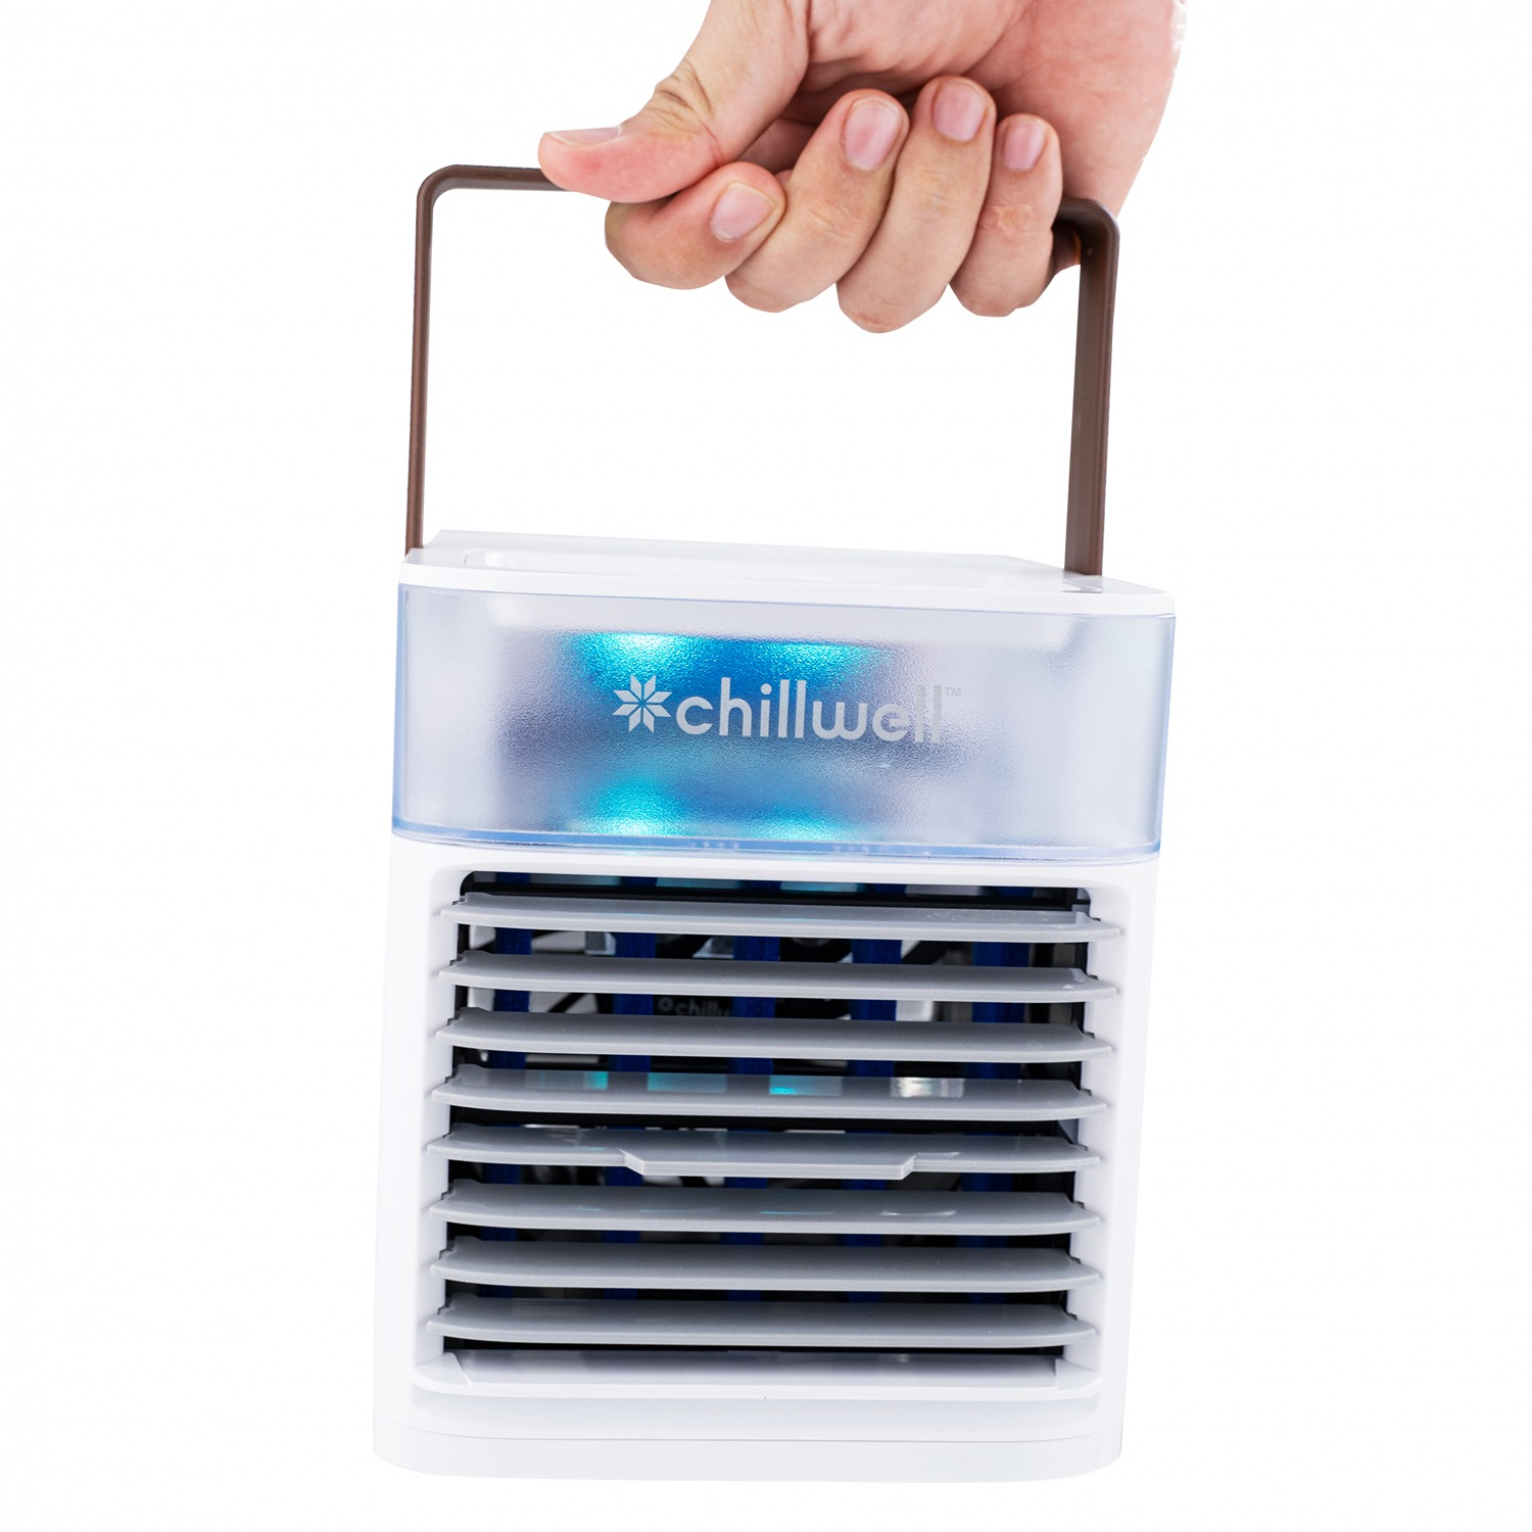 Chillwell AC Does It Work